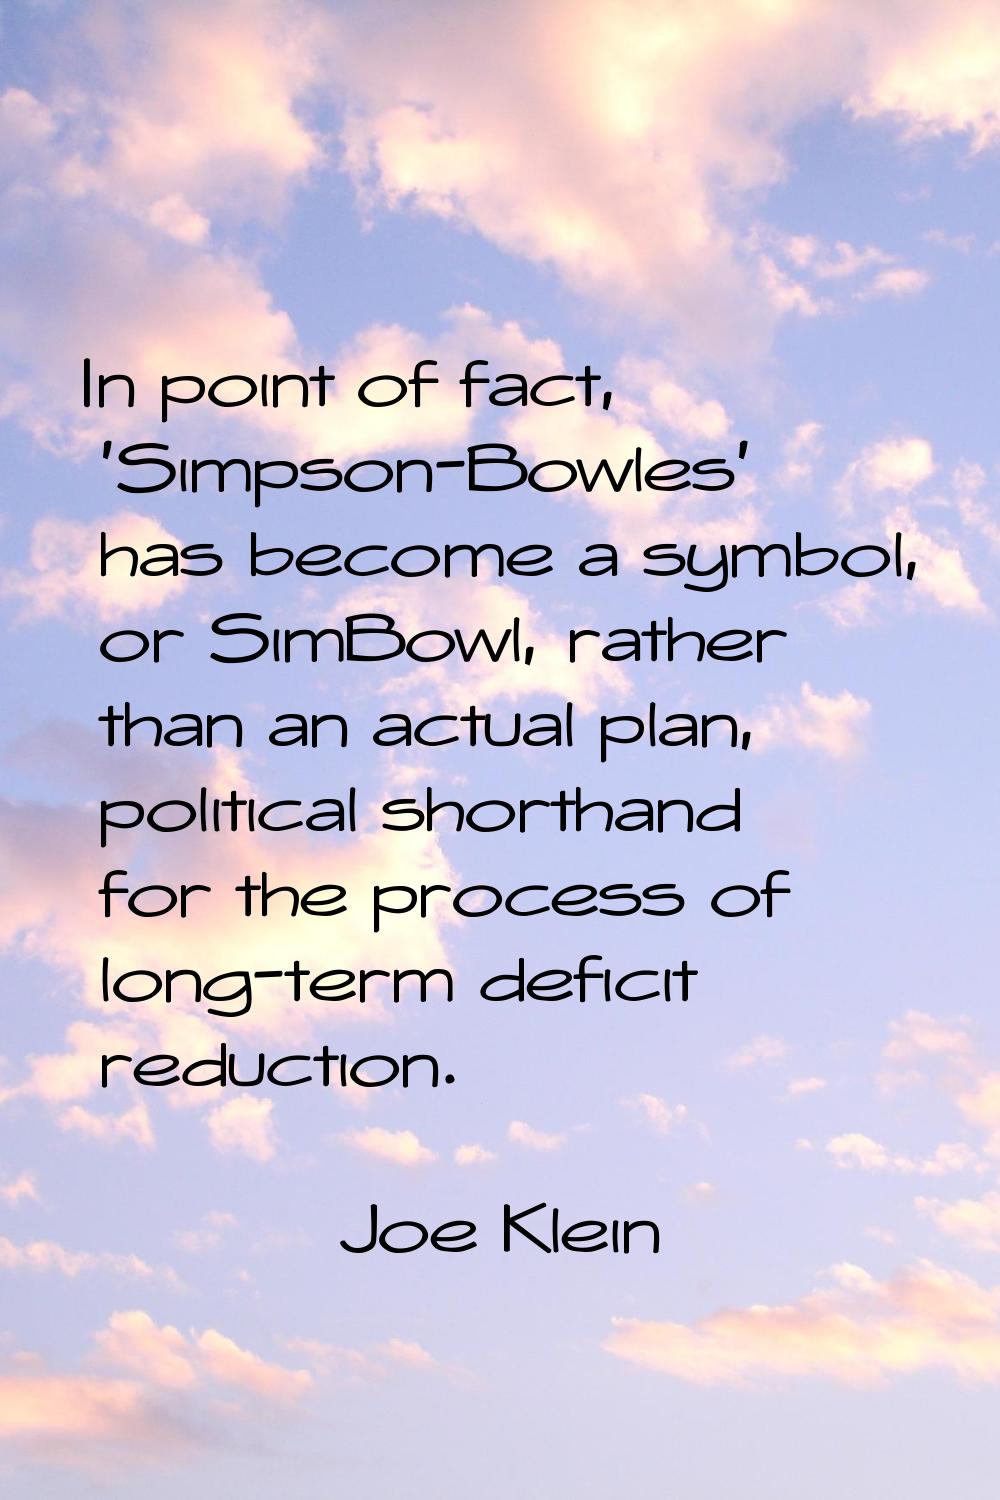 In point of fact, 'Simpson-Bowles' has become a symbol, or SimBowl, rather than an actual plan, pol